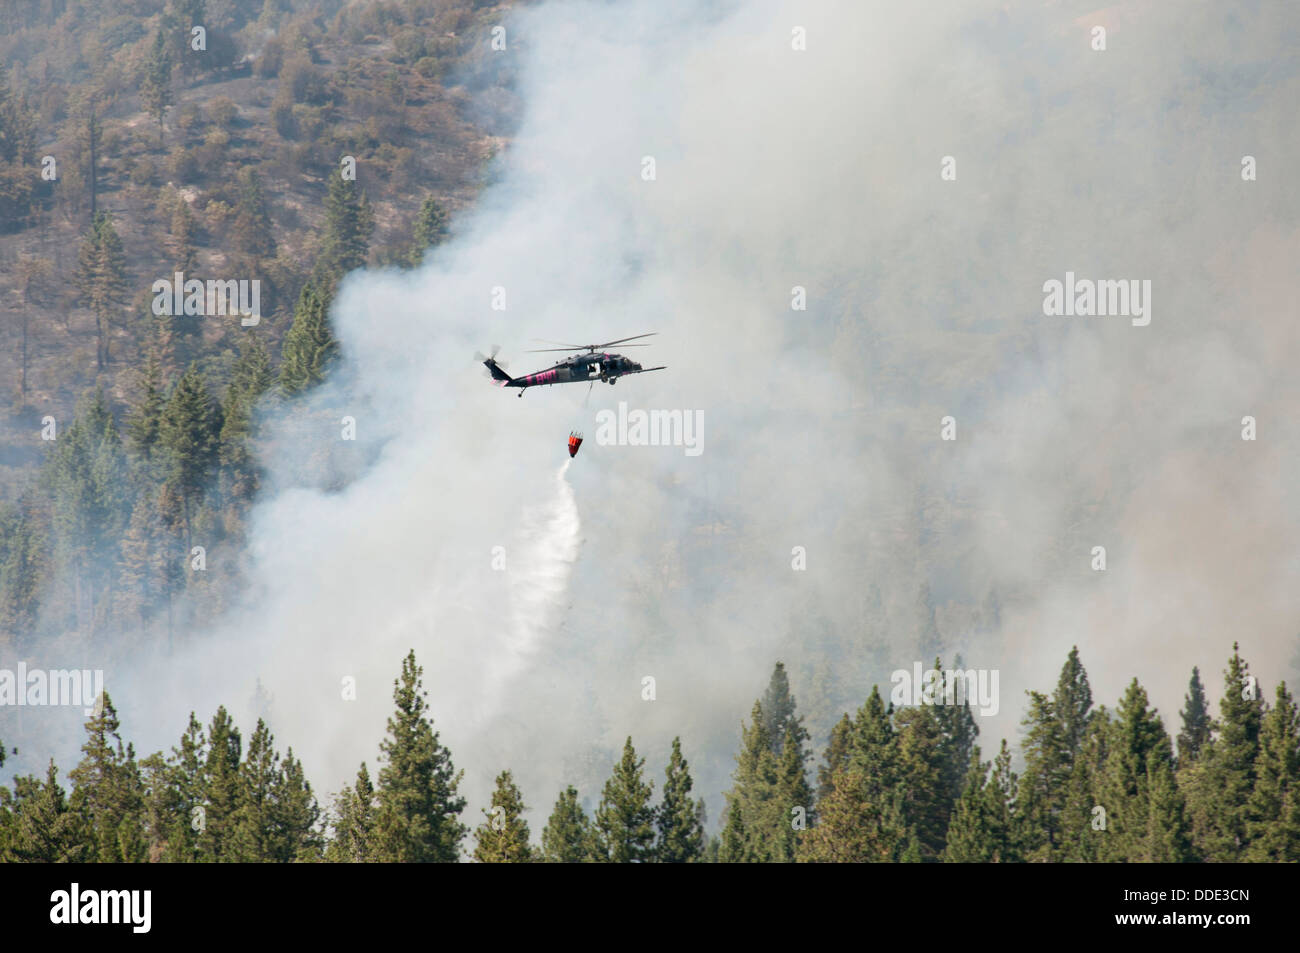 A California Air National Guards Black Hawk helicopter drops water on the Rim Fire during firefighting operations August 20, 2013 near Yosemite, CA. The fire continues to burn old growth forest and threaten Yosemite National Park. Stock Photo